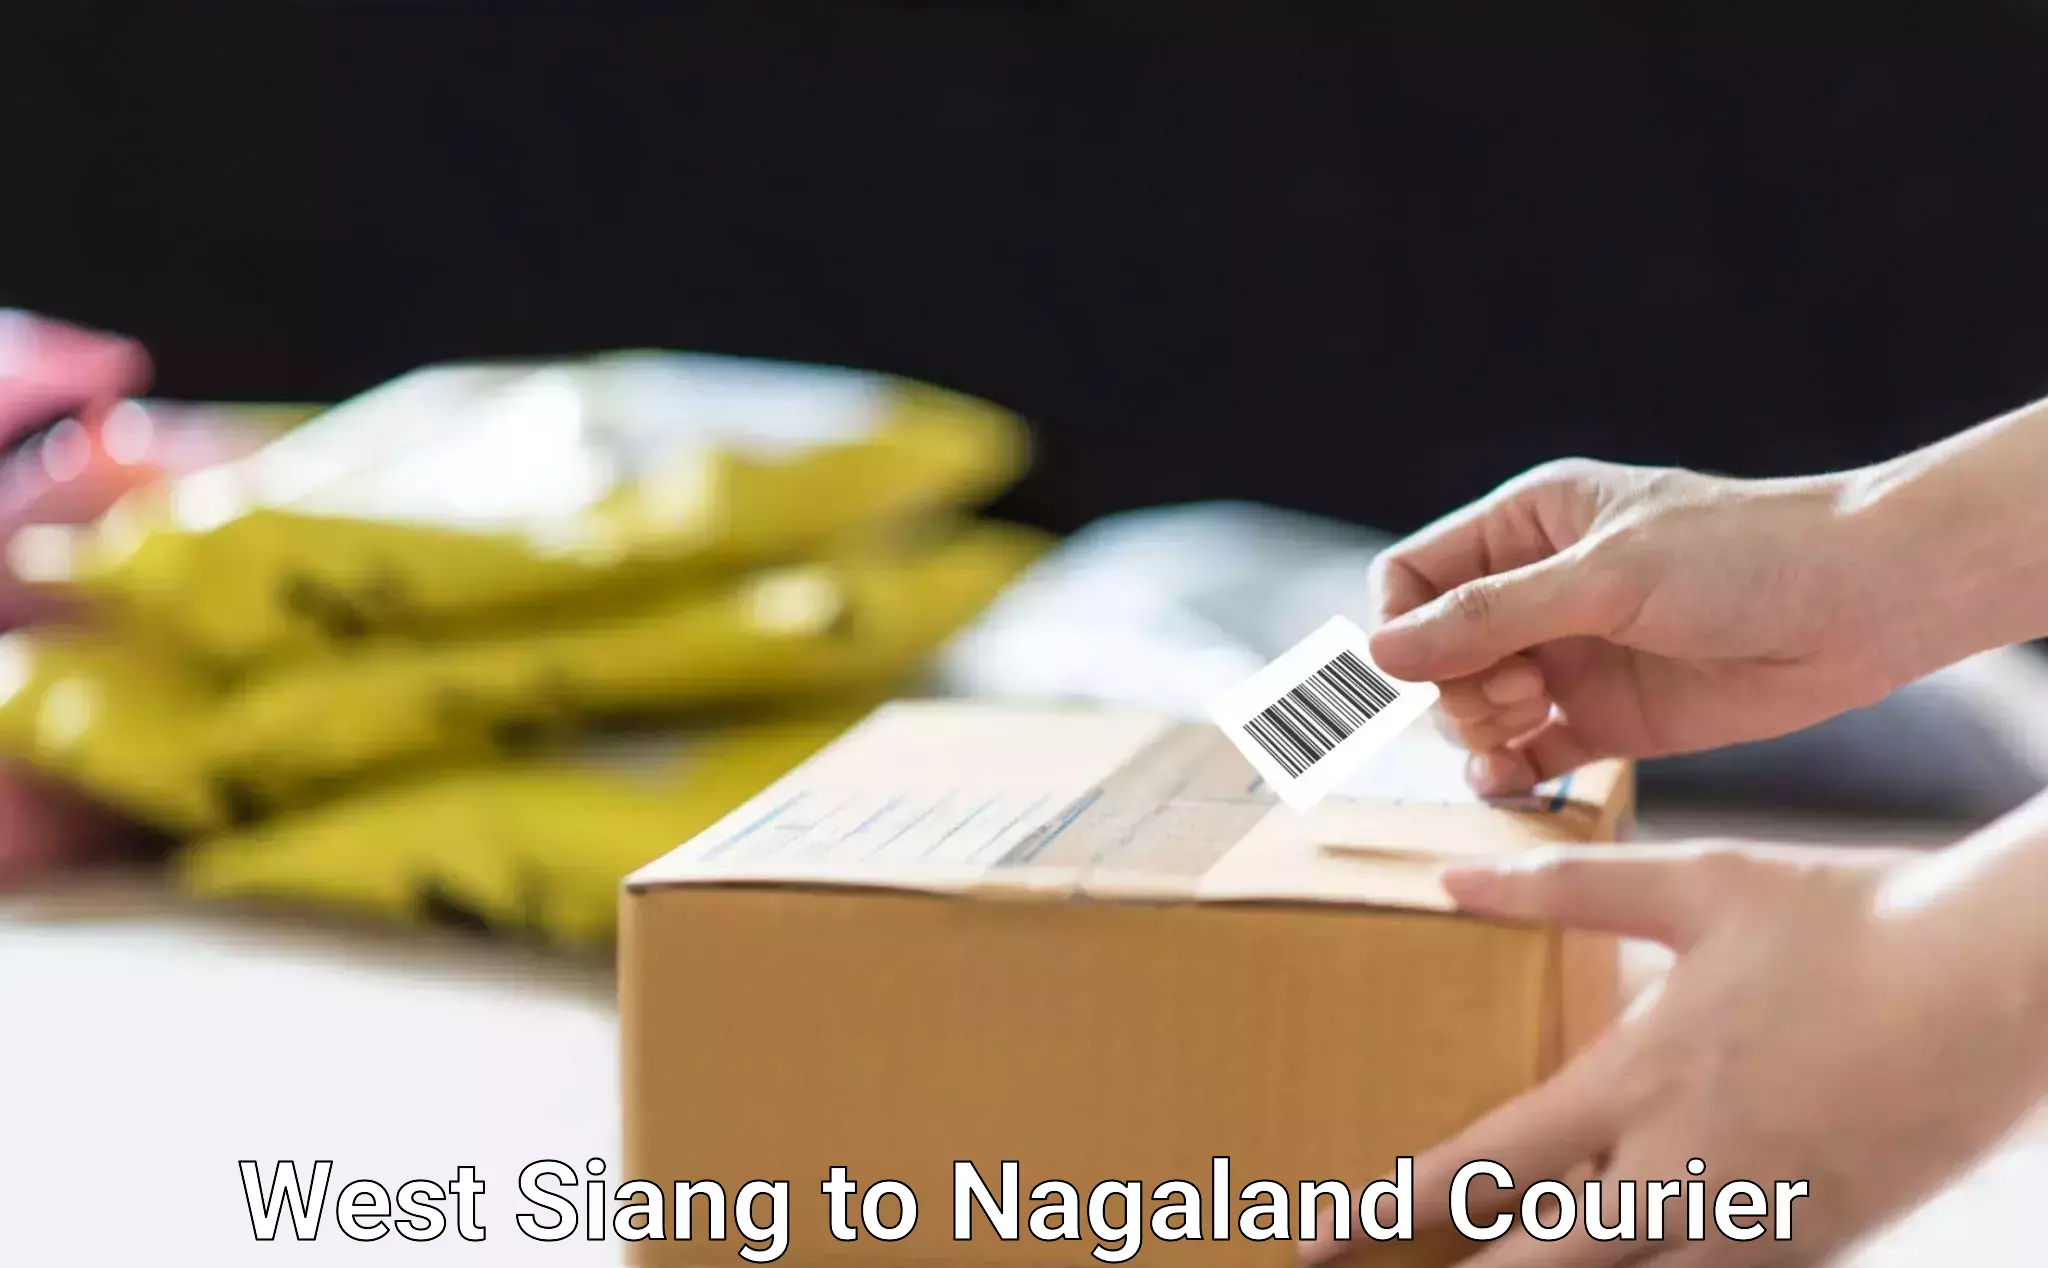 Courier membership West Siang to Nagaland